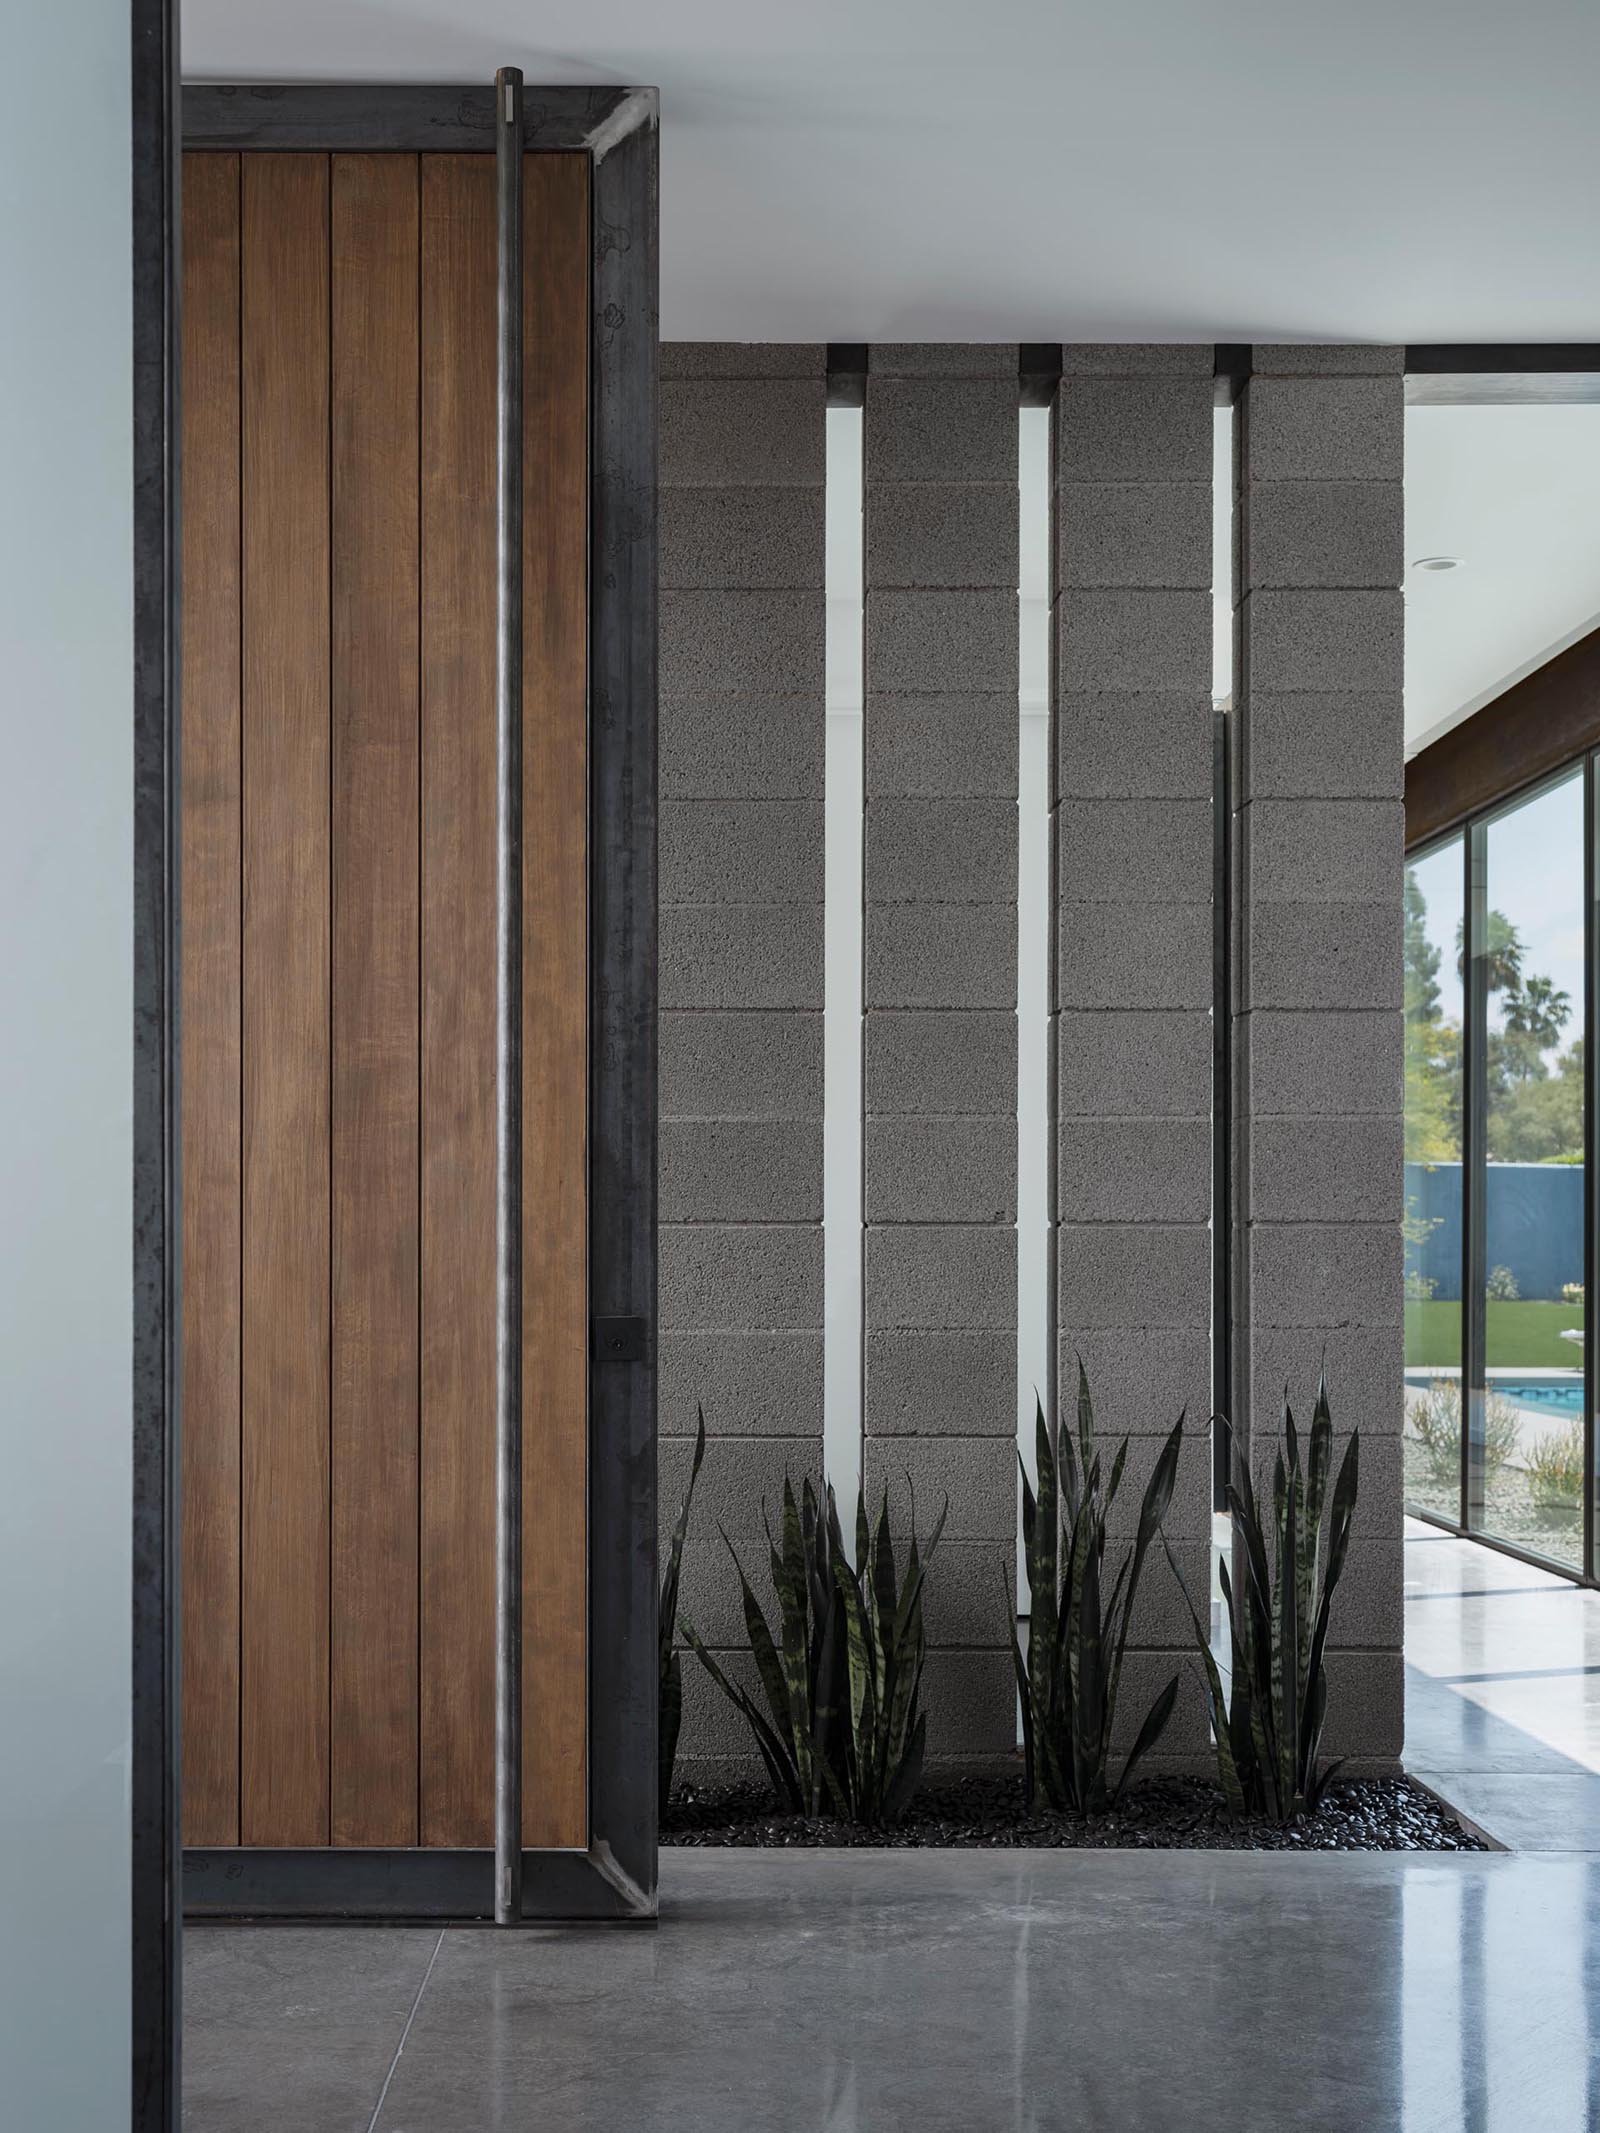 An oversized wood front door with a metal frame pivots to create an eye-catching entryway that opens to a foyer. A small garden is featured on both the exterior and interior of the home.